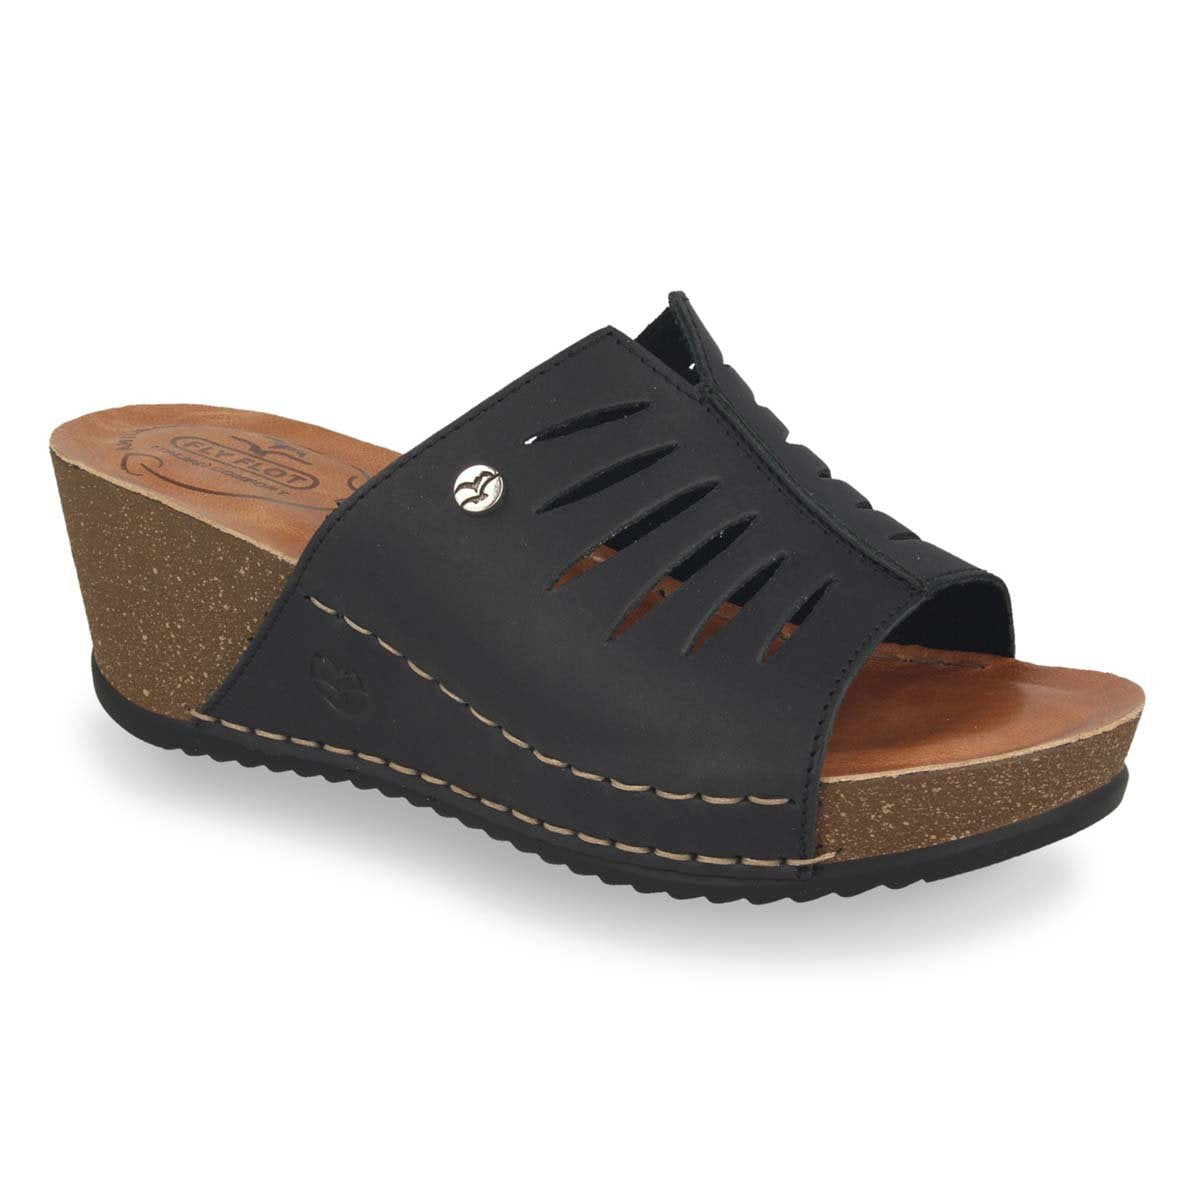 See the Leather Wedge With Anti-Shock Cushioned Leather Insole in the colour BLACK, available in various sizes